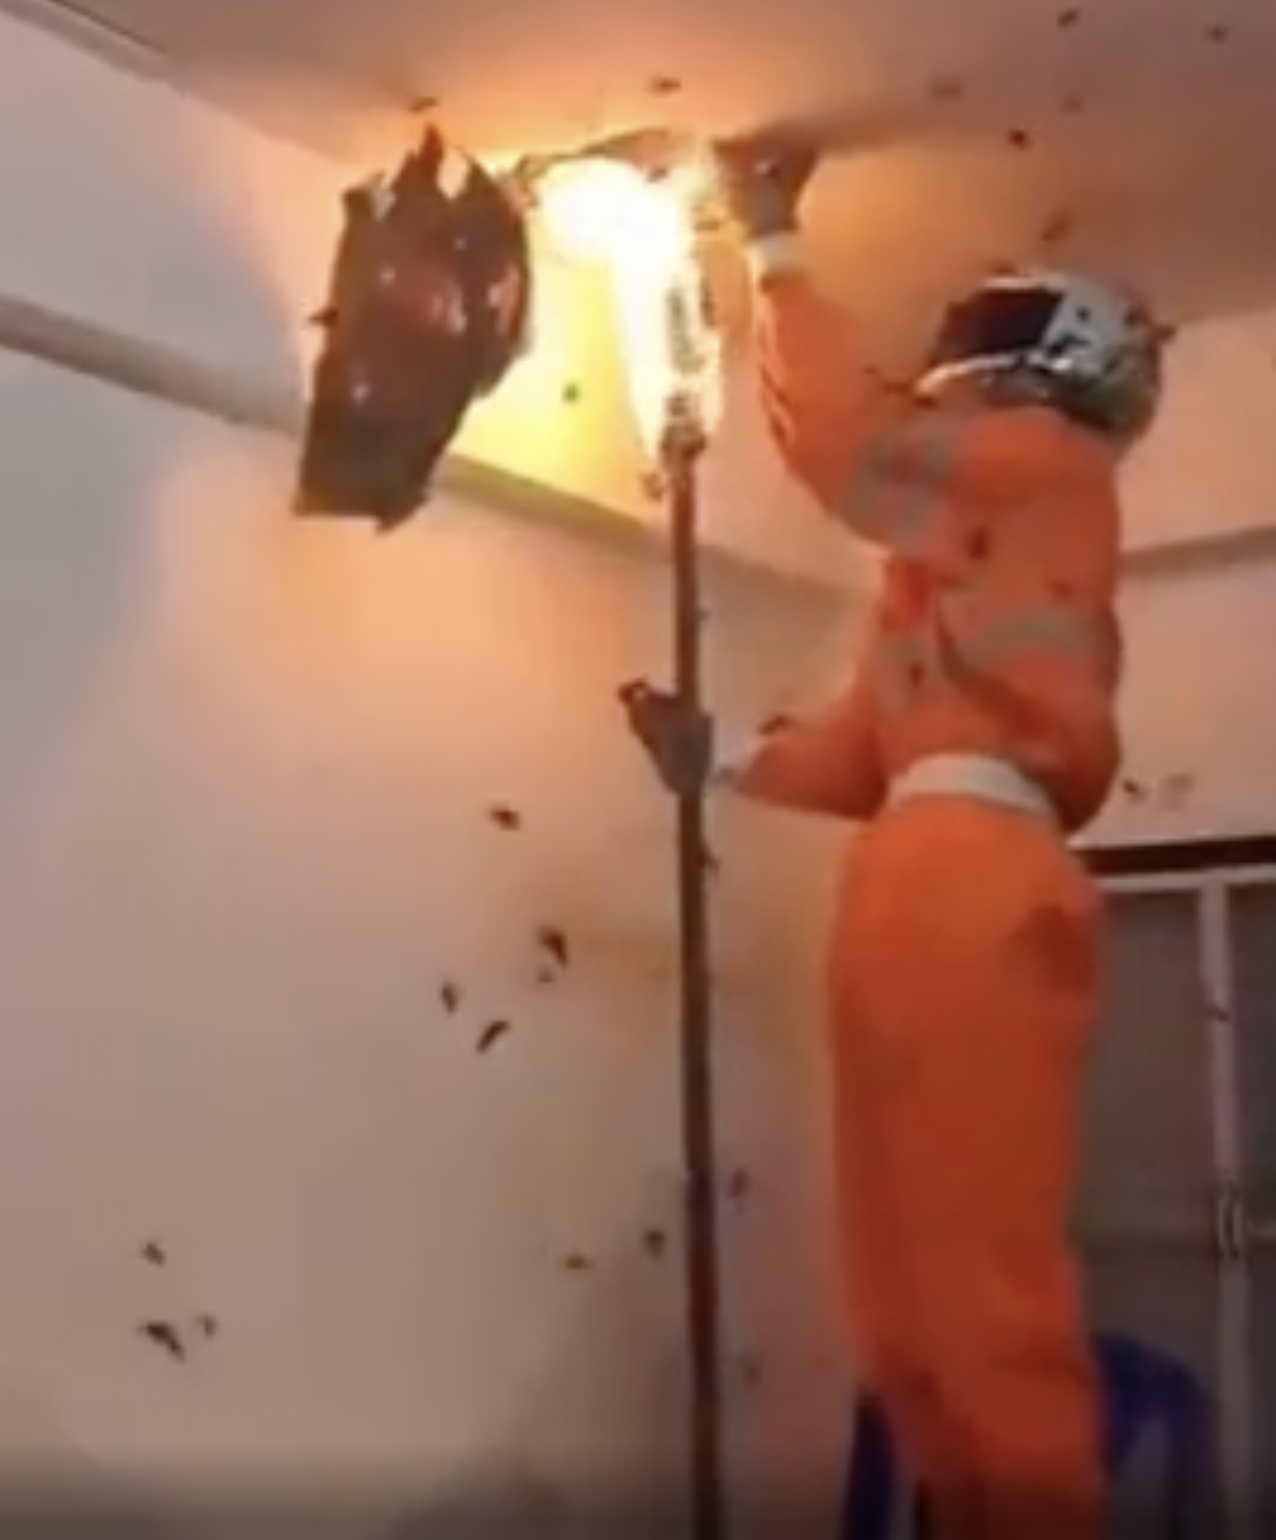 DIY exterminator trying to burn a hoard of insects. 